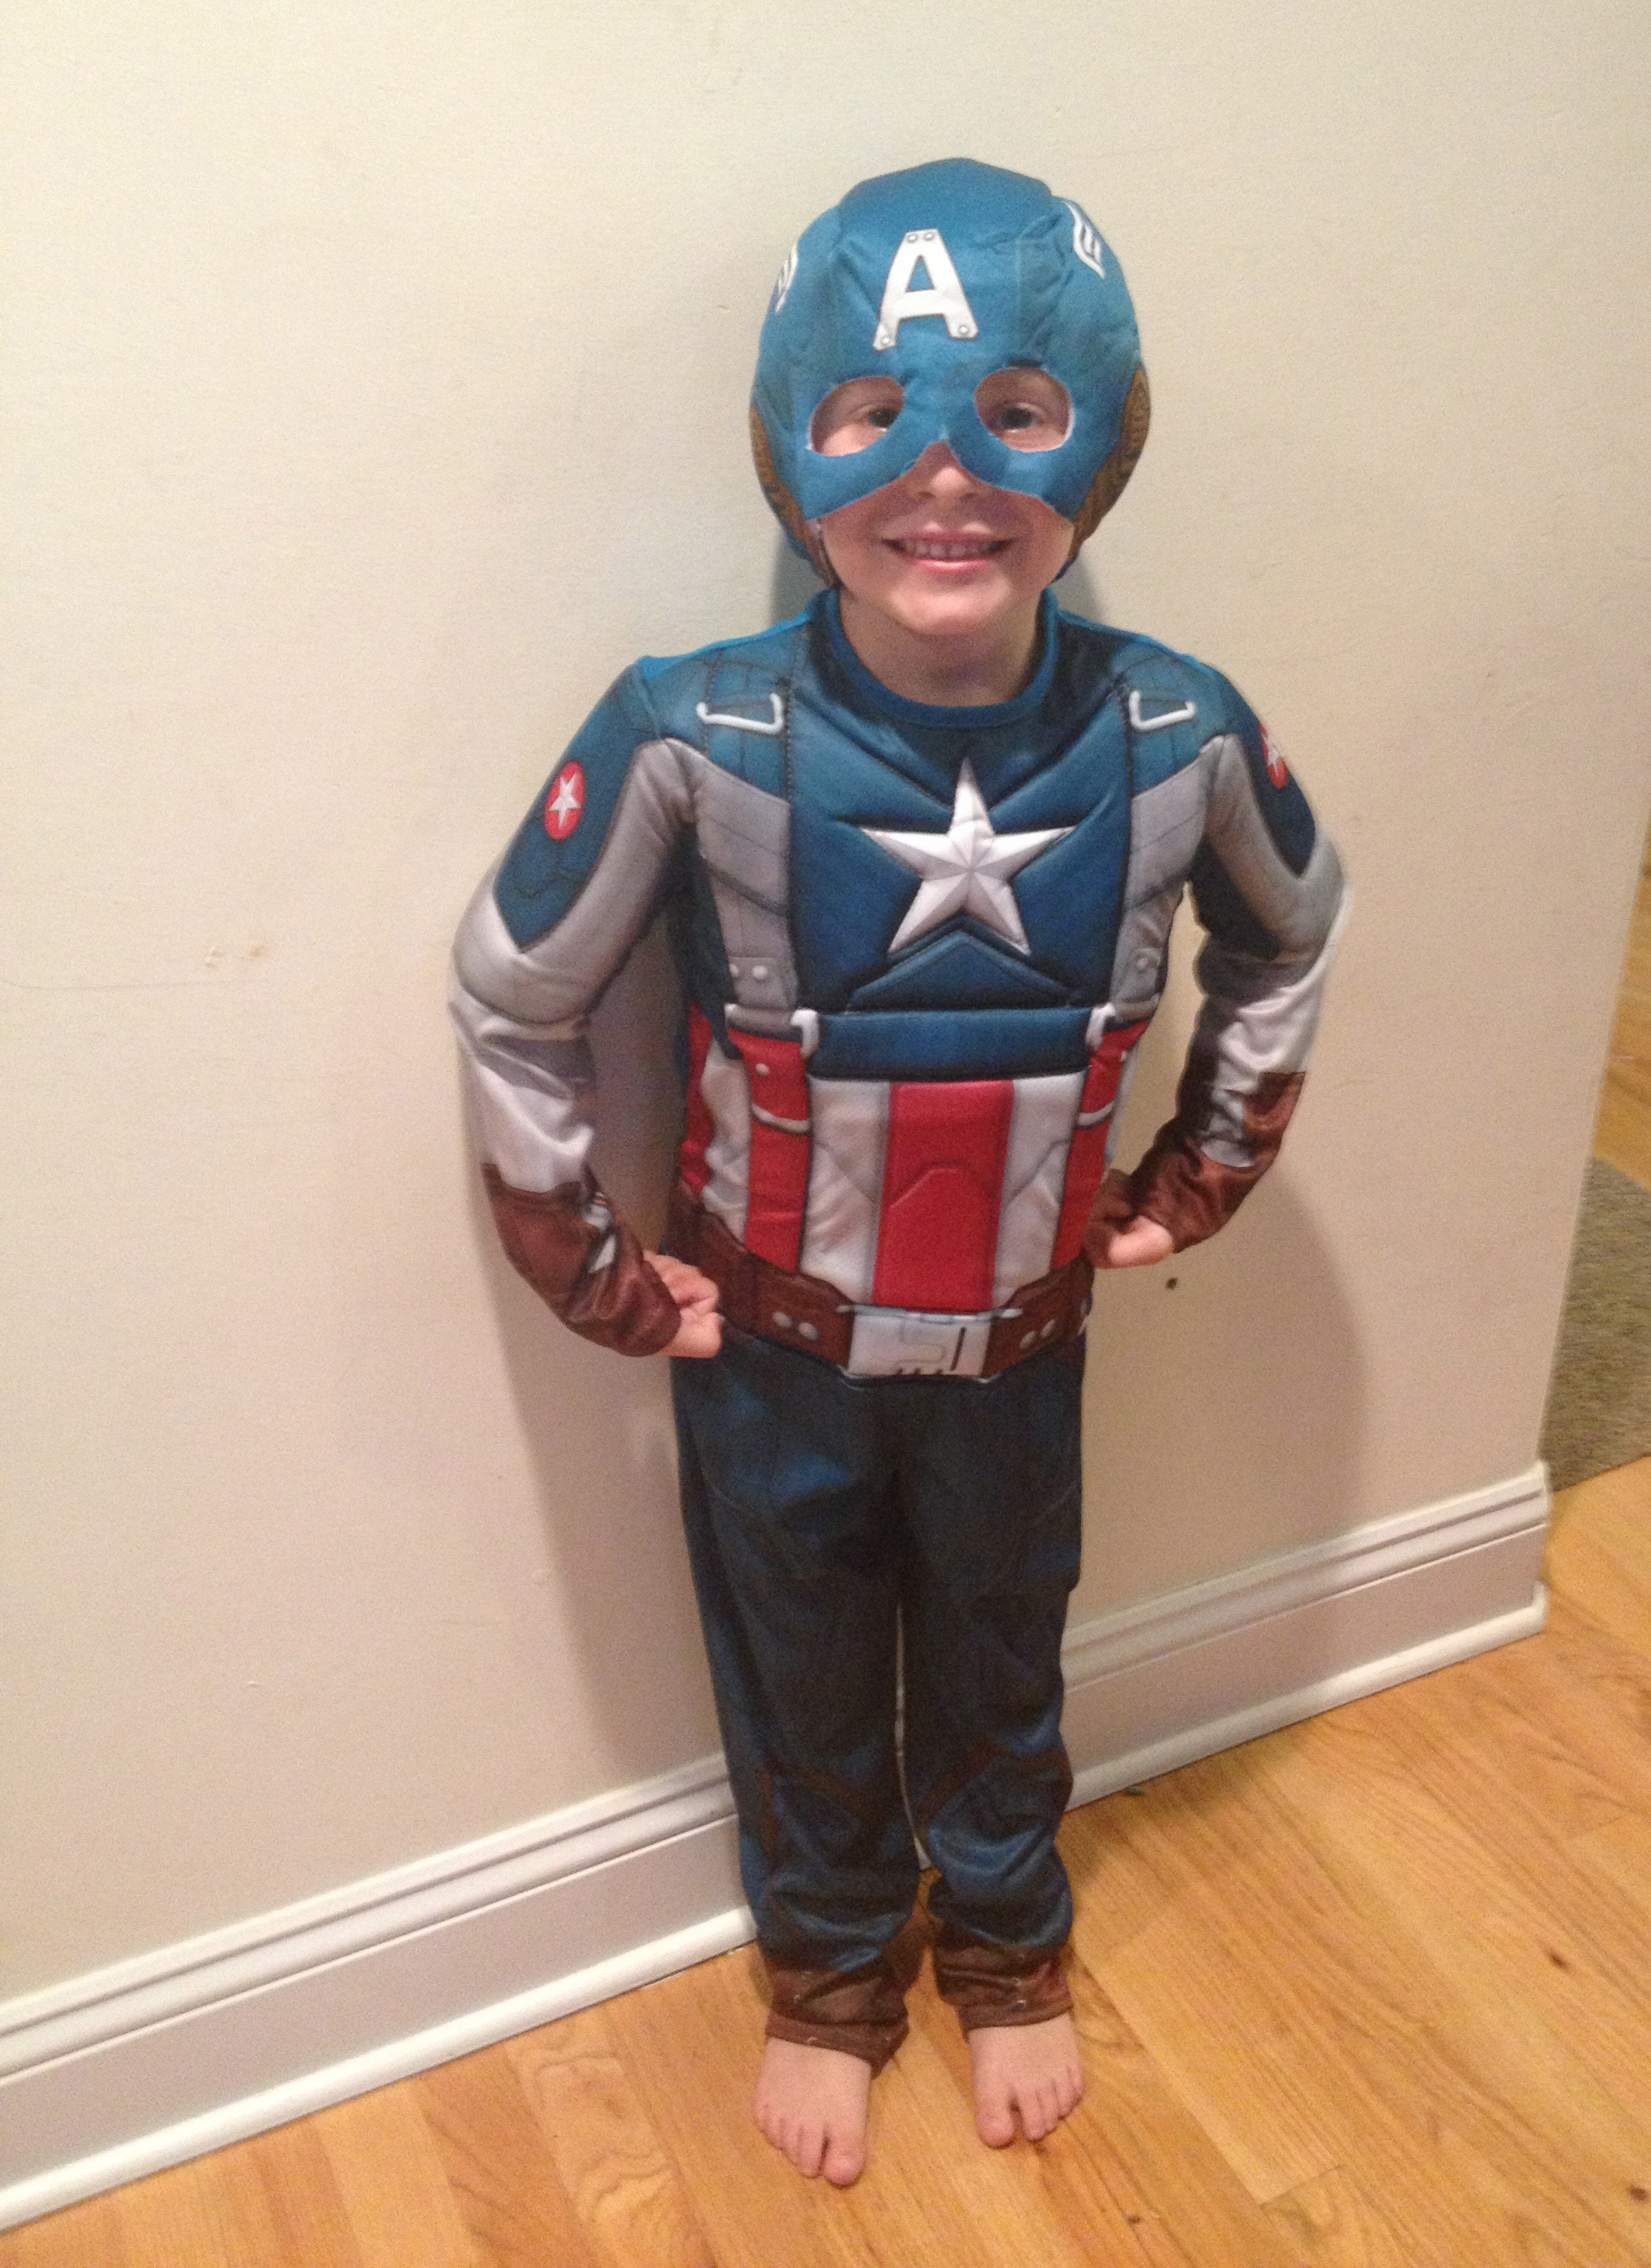 Tyler was so excited to put on his awesome Captain America Costume! It fit perfectly!